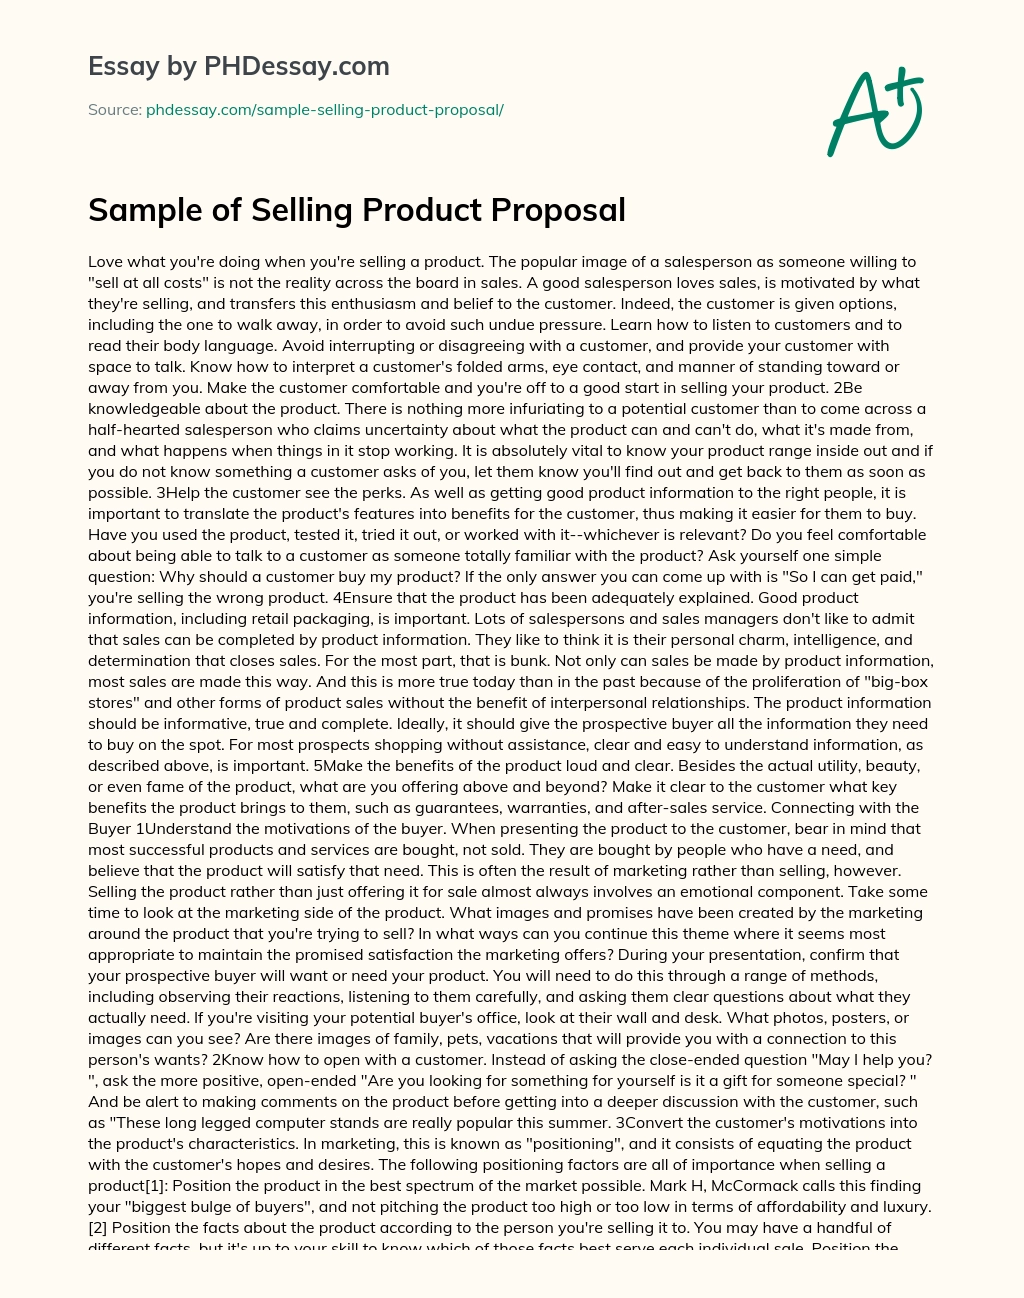 Sample of Selling Product Proposal essay